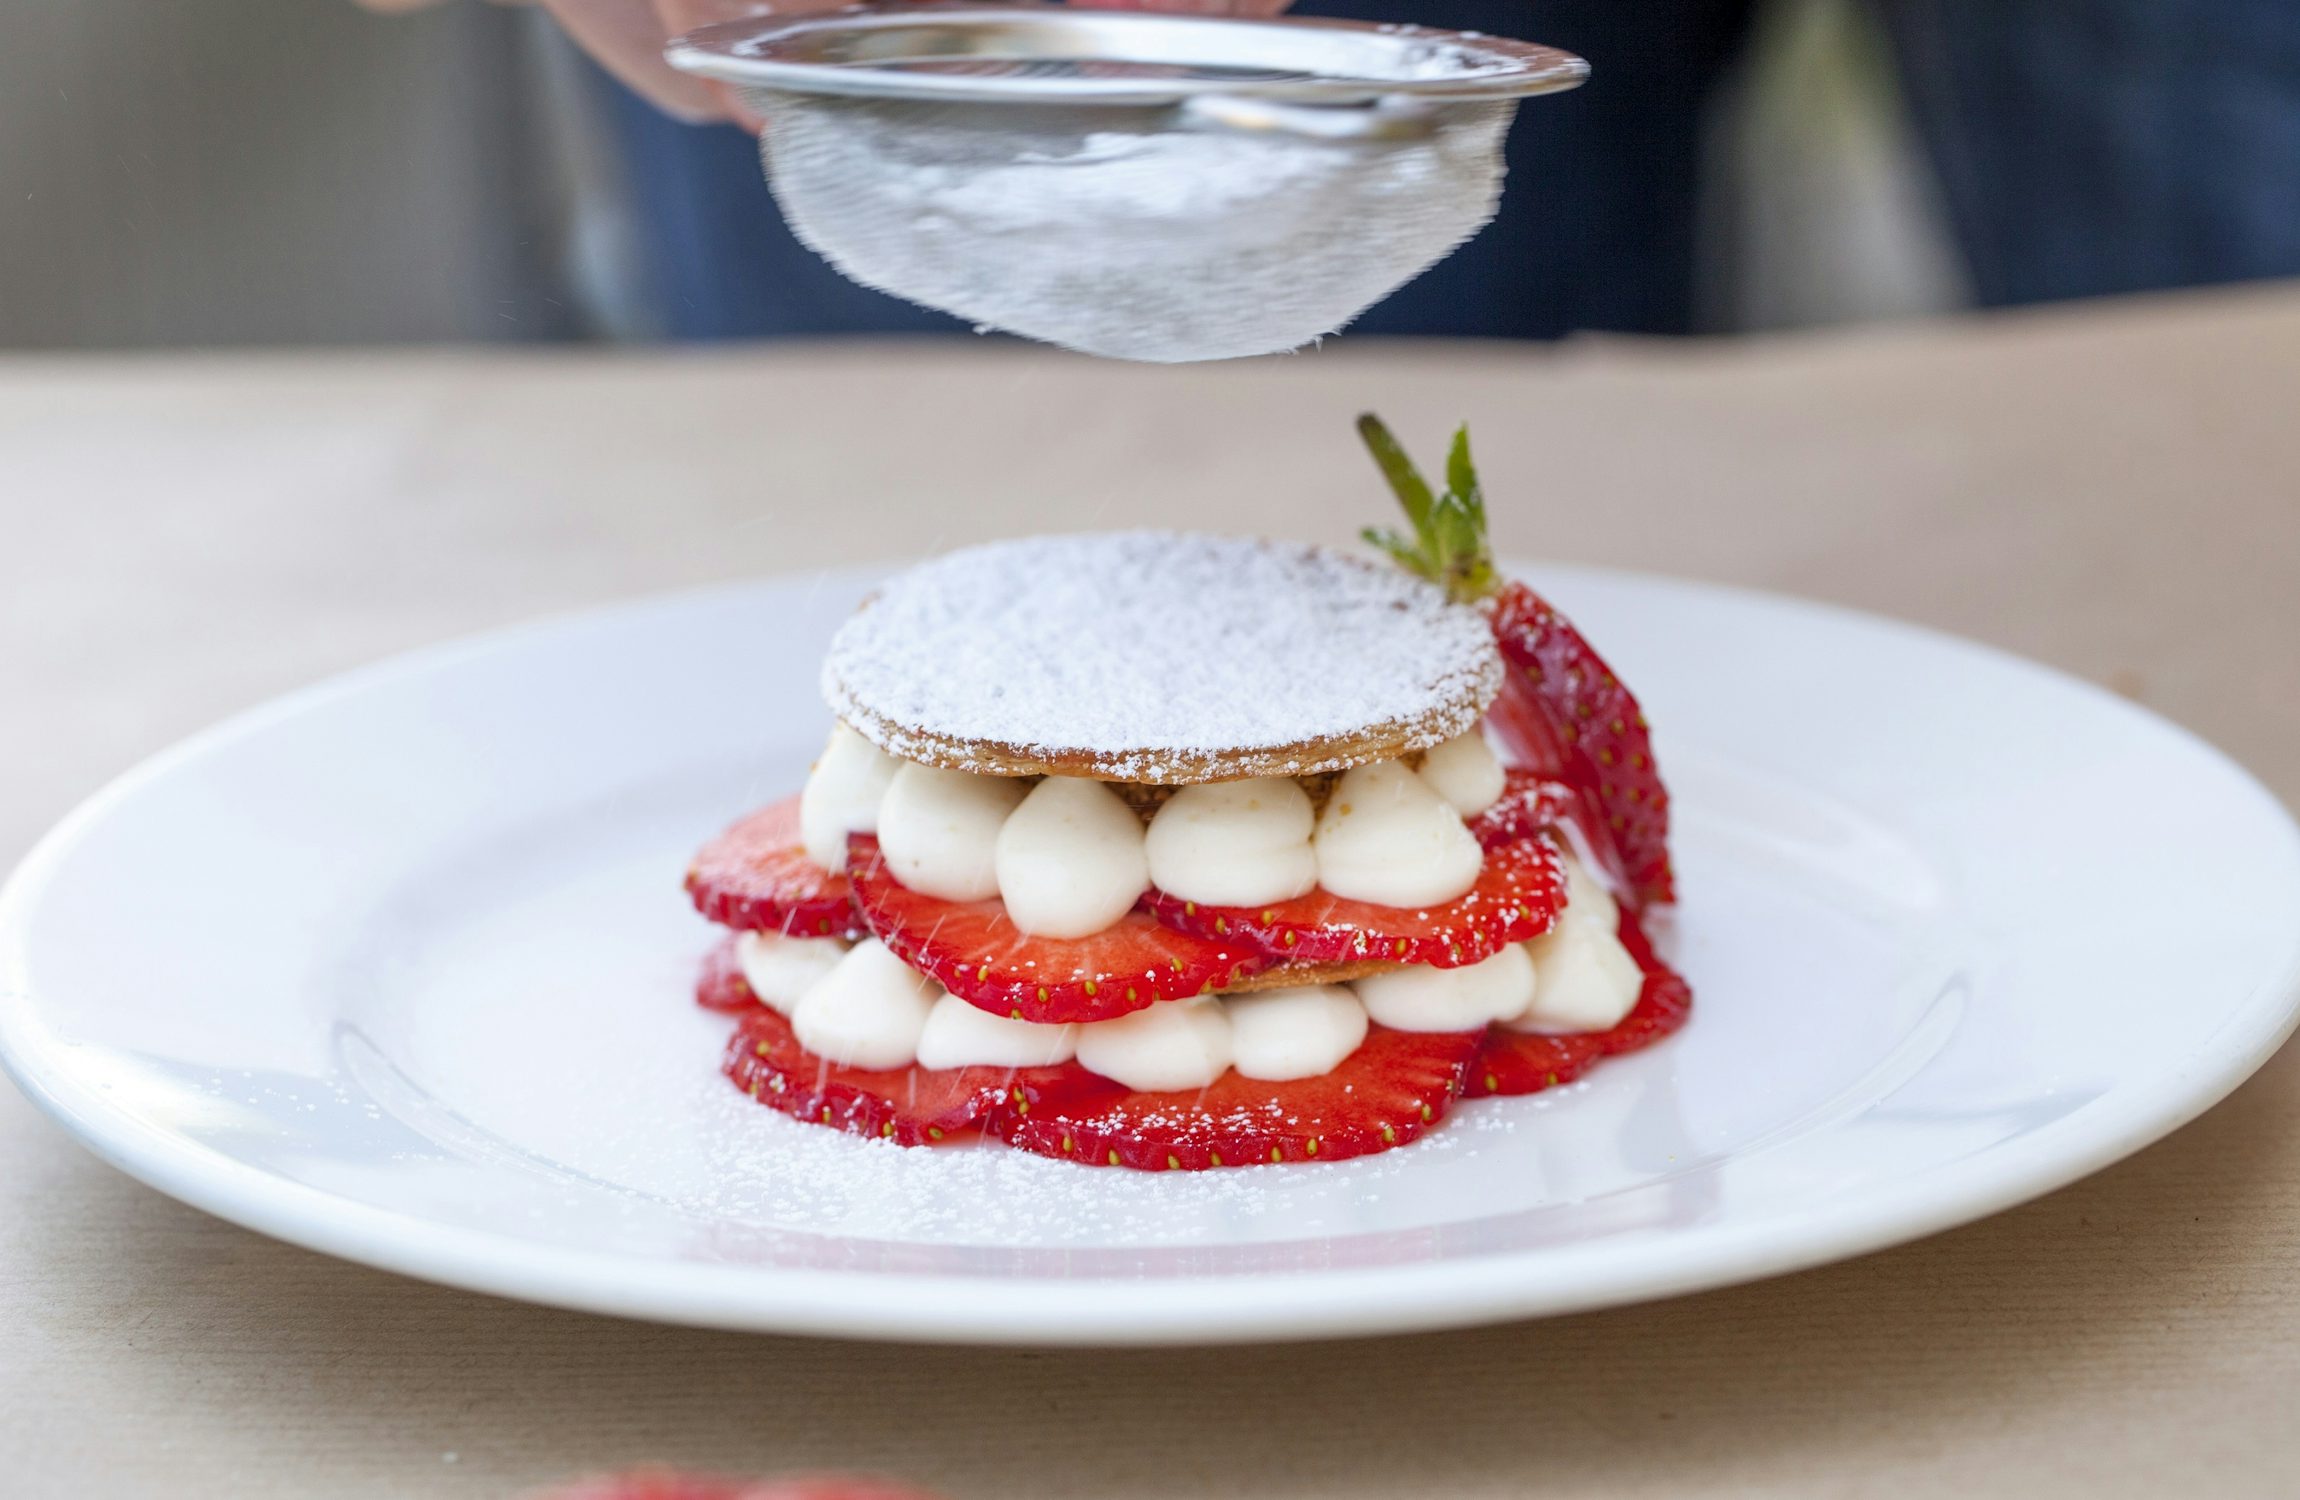 Strawberry & Macadamia Mille-feuille